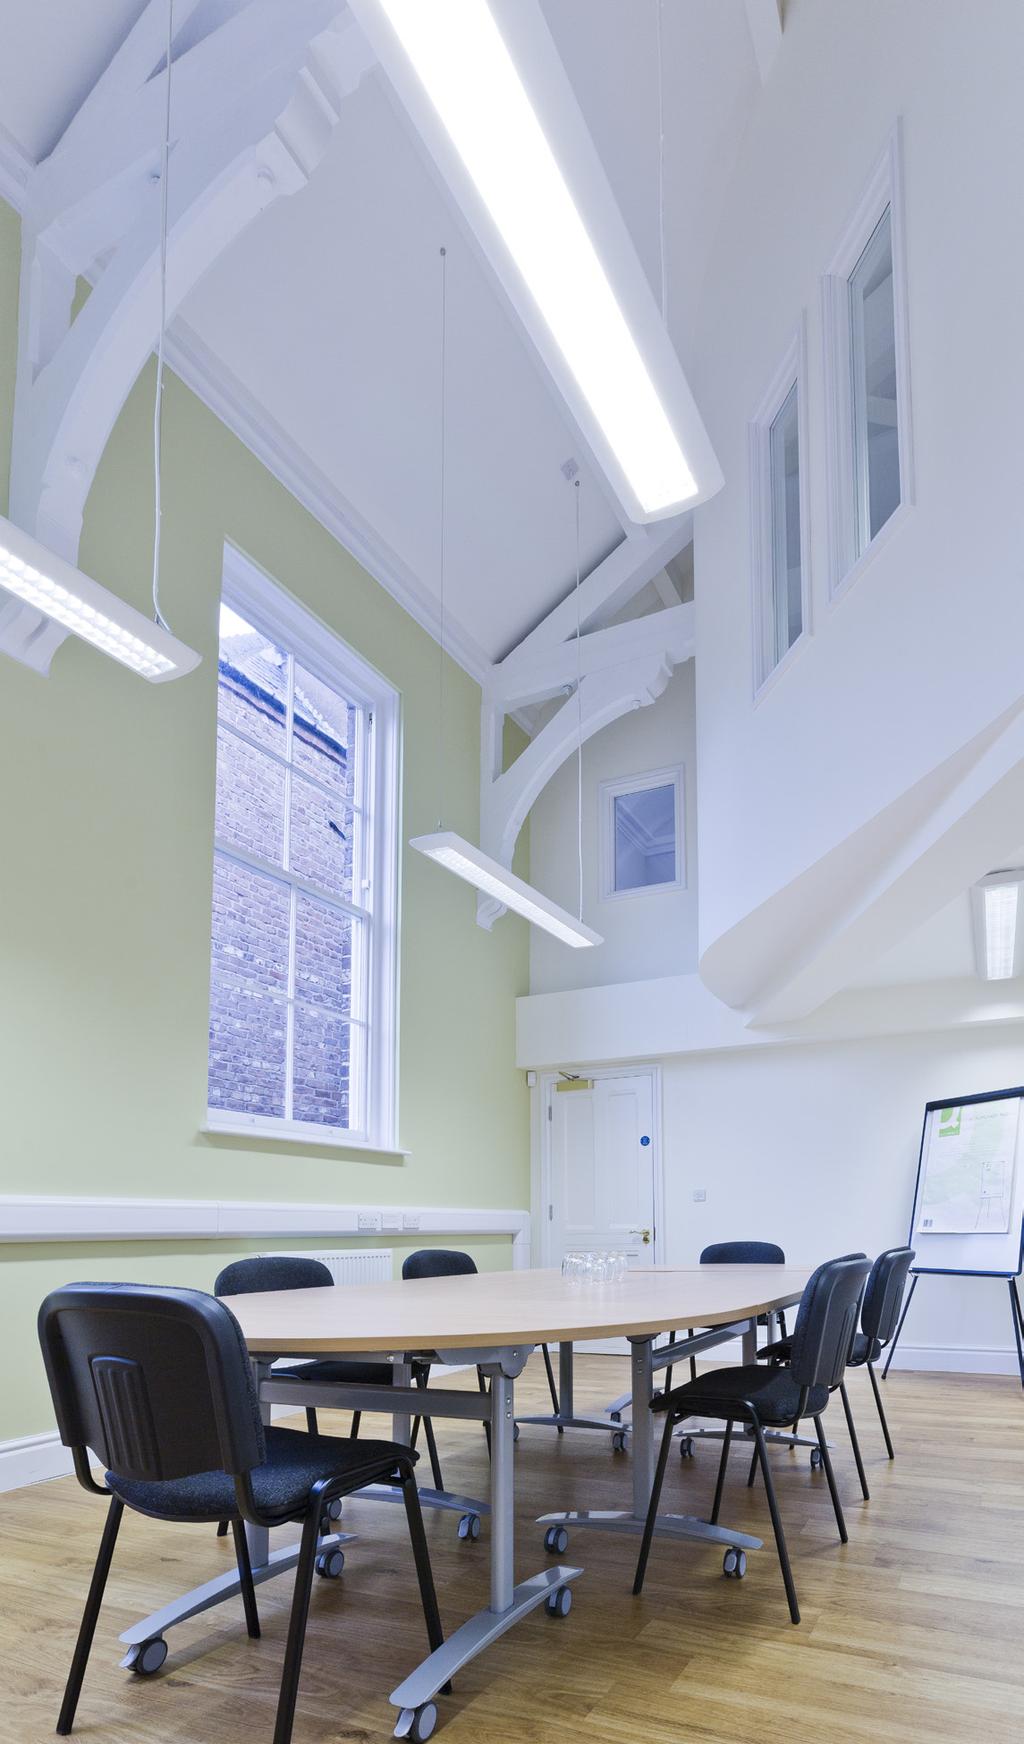 Eirias Tucked away from the hustle and bustle, and with a stunning double-height, beamed ceiling, Eirias feels like the biggest small meeting room you ve ever been in perfect if you need to get away